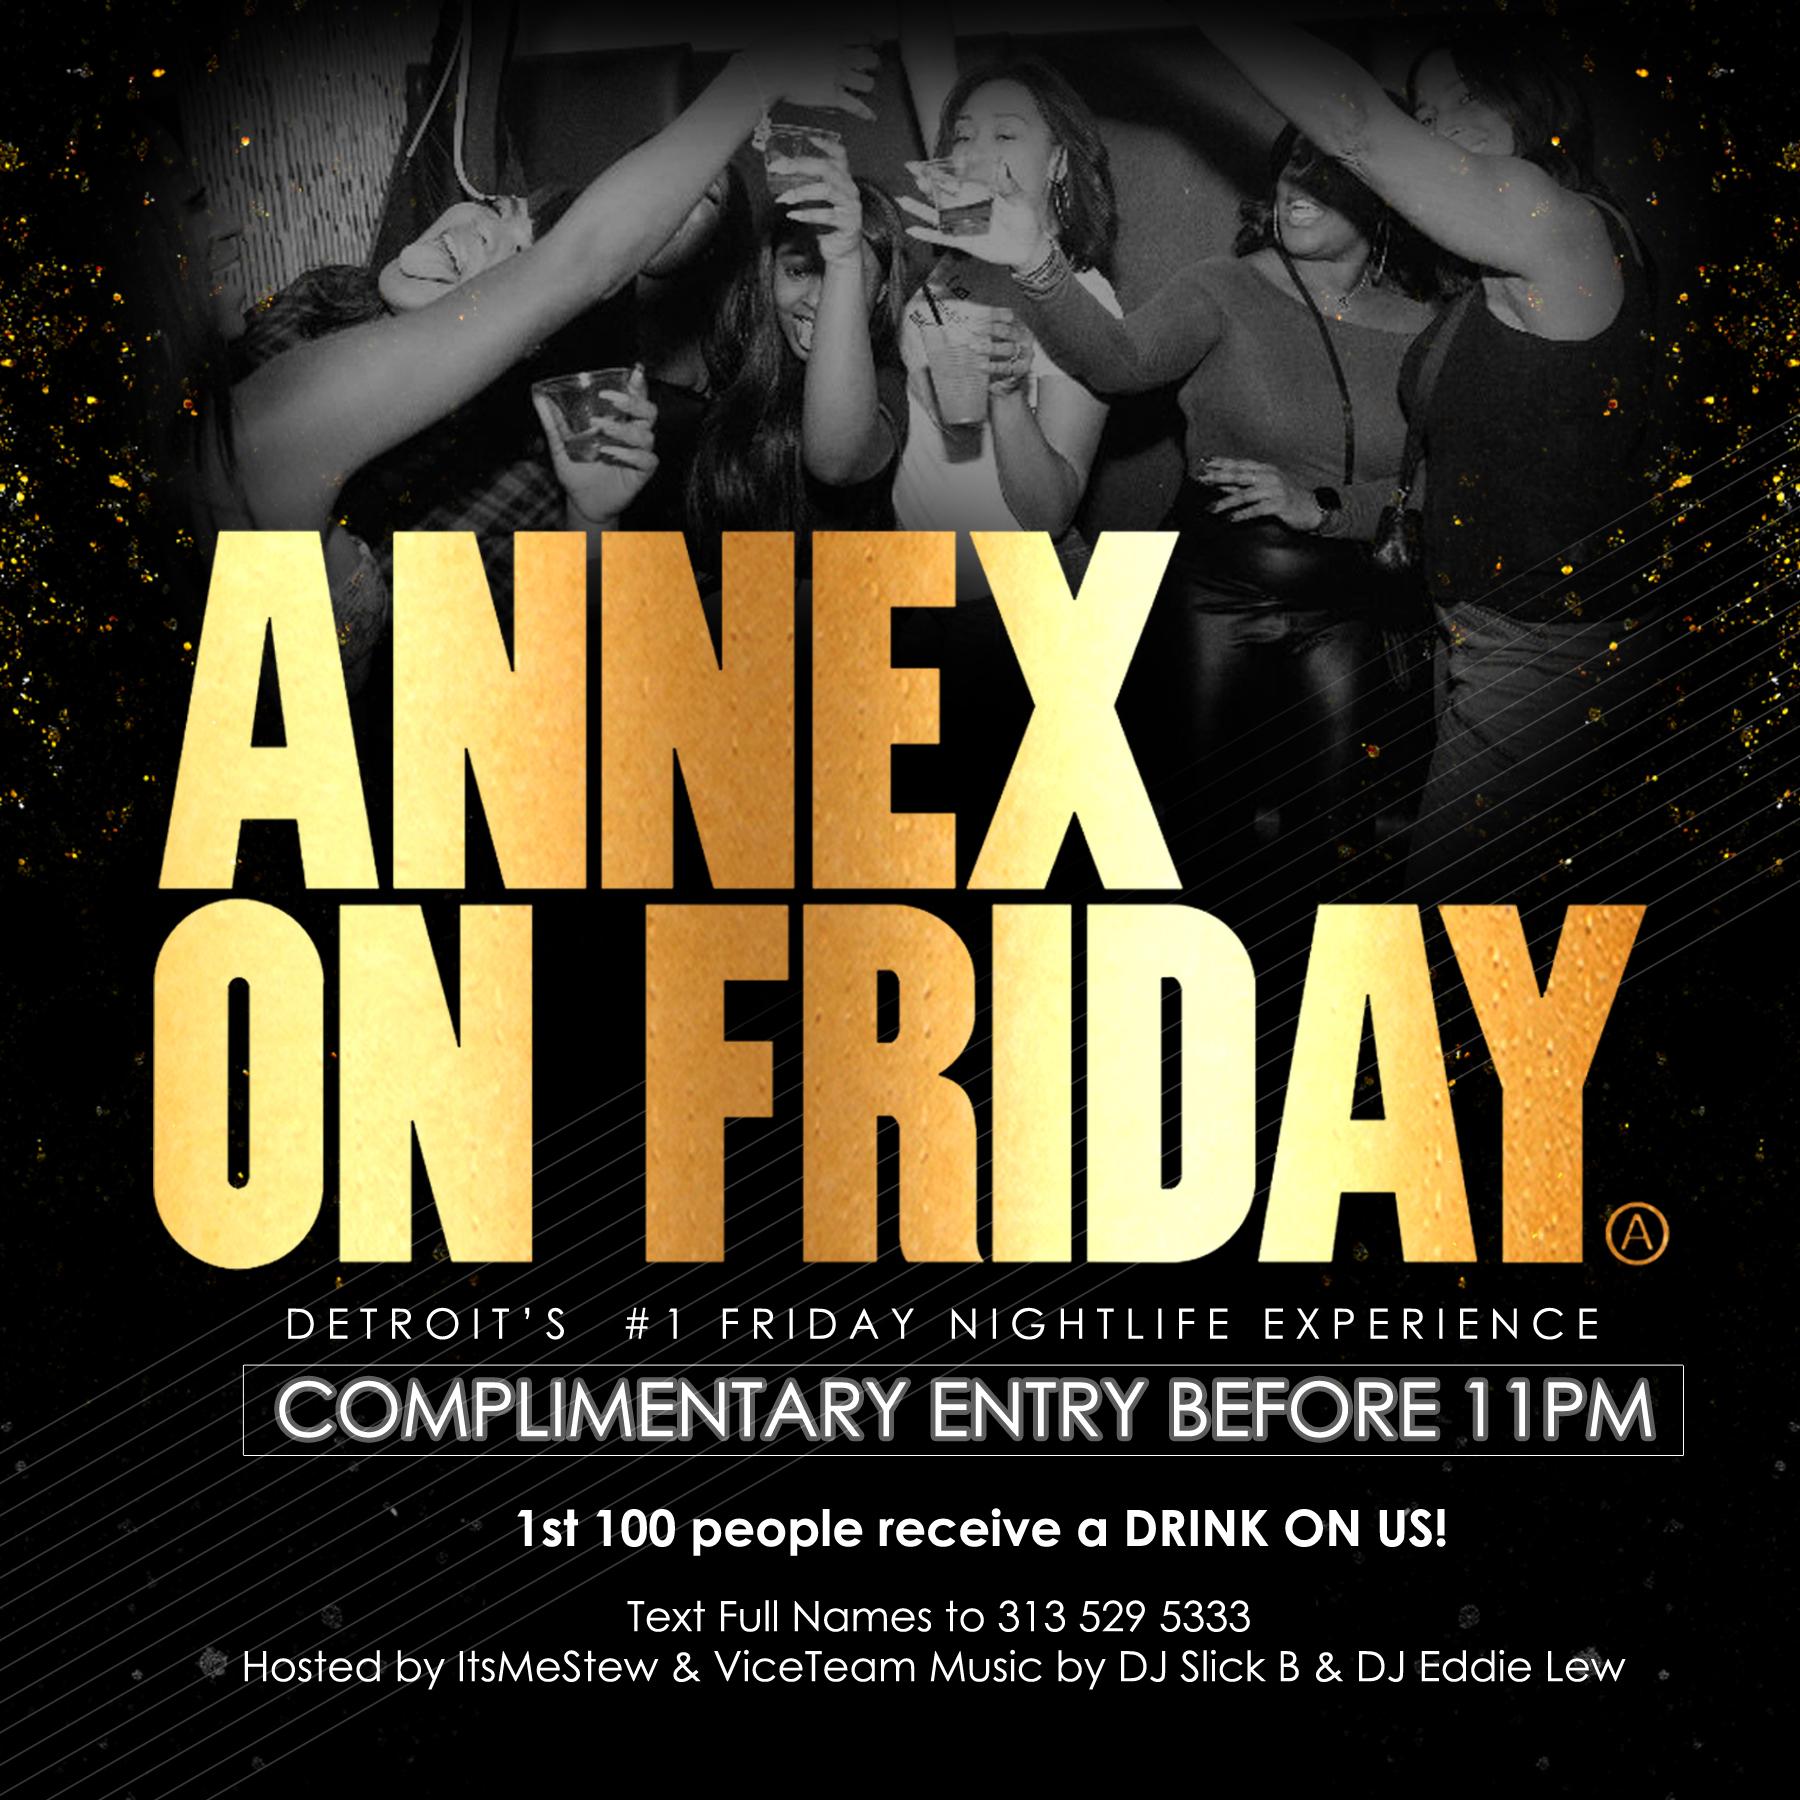 RSVP to 313 529 5333 for a chance to WIN A FREE BOOTH AT ANNEX on FRIDAY!